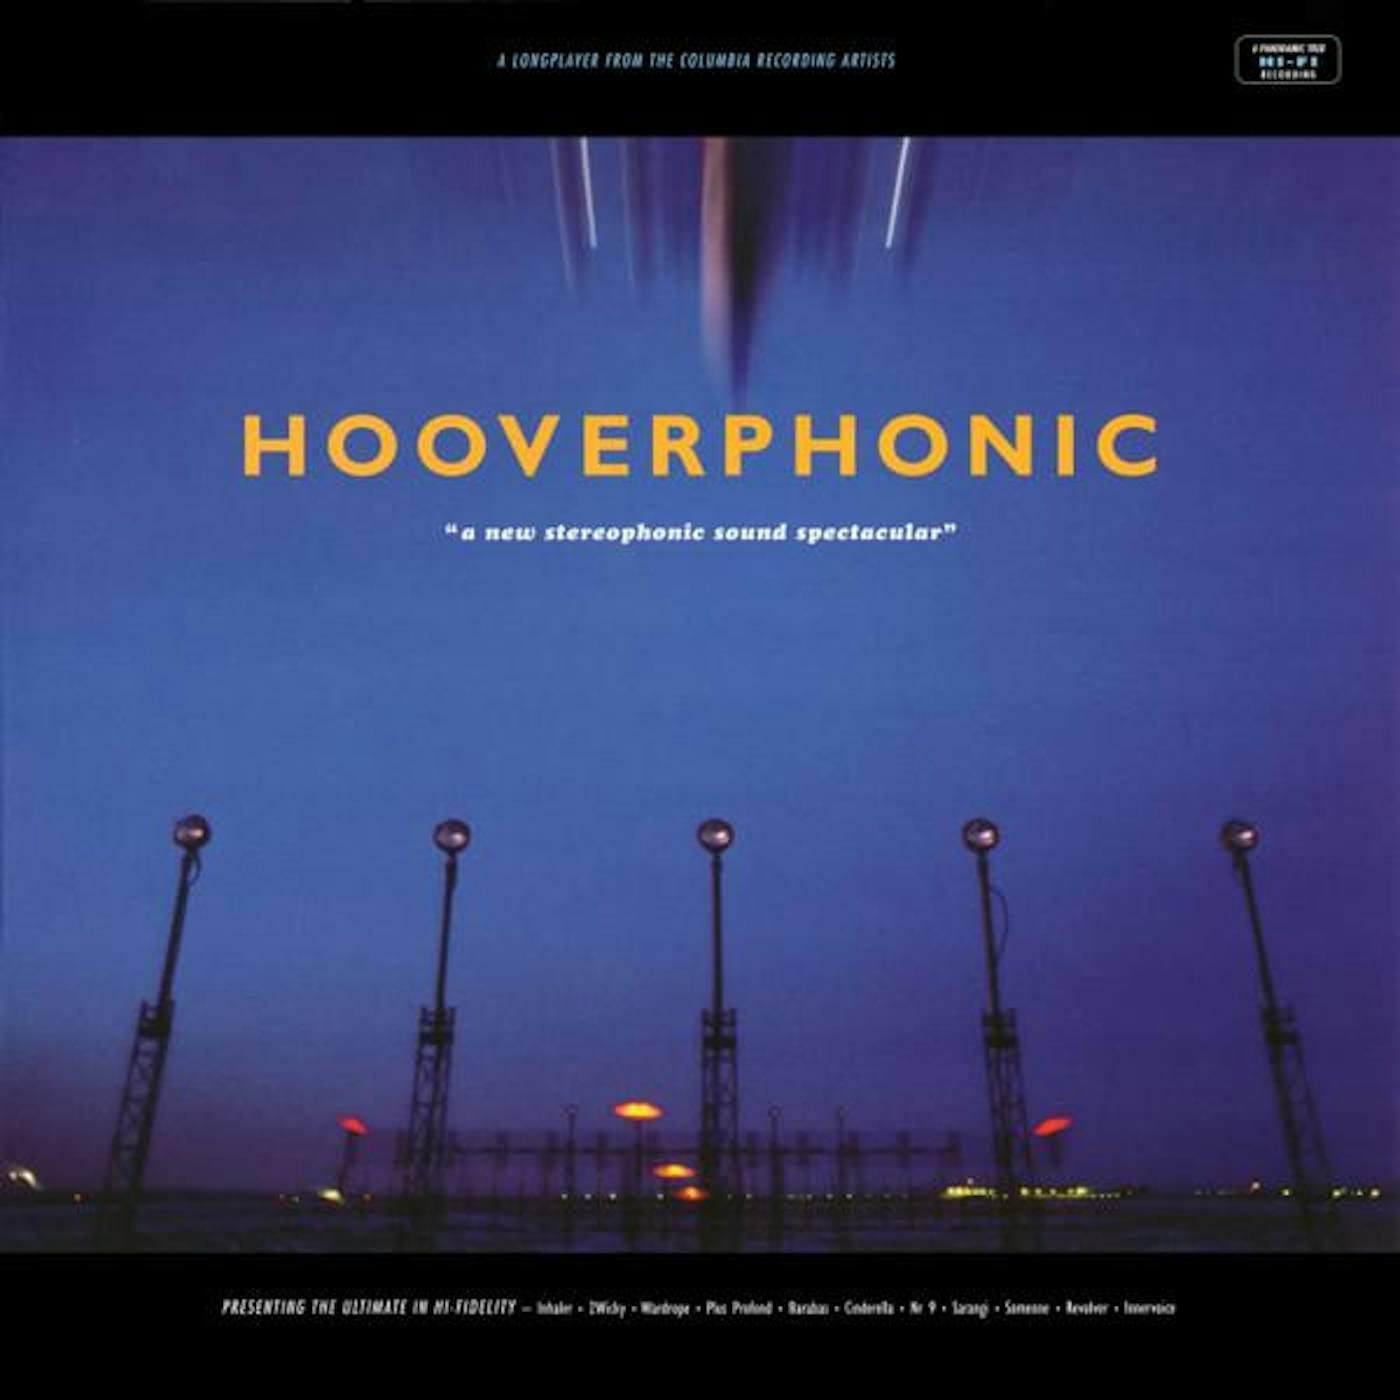 Hooverphonic NEW STEREOPHONIC SPECTACULAR (180G) Vinyl Record